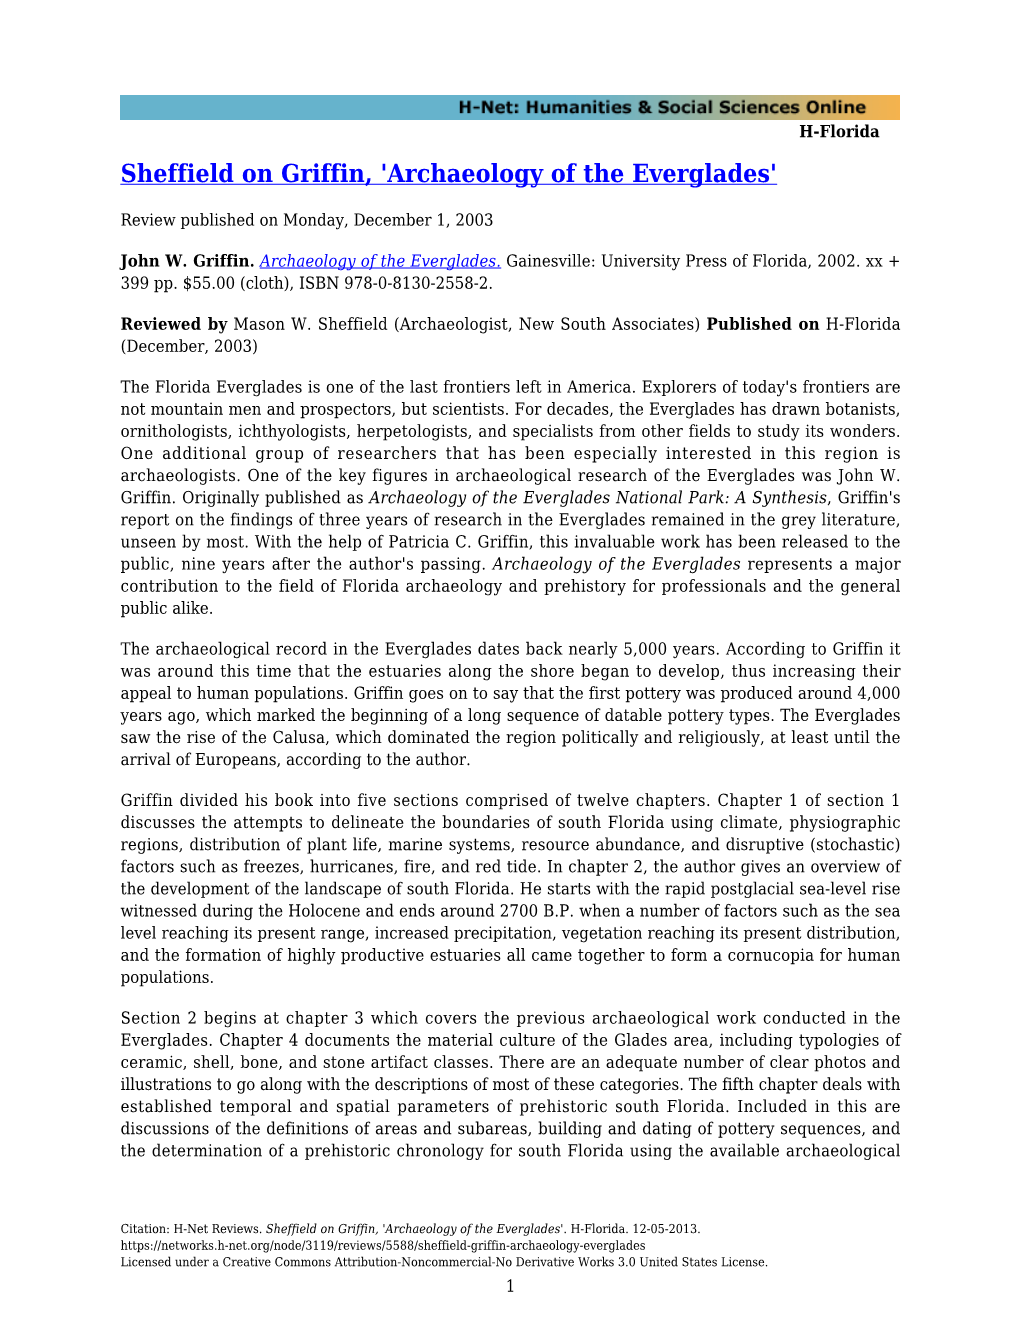 Sheffield on Griffin, 'Archaeology of the Everglades'